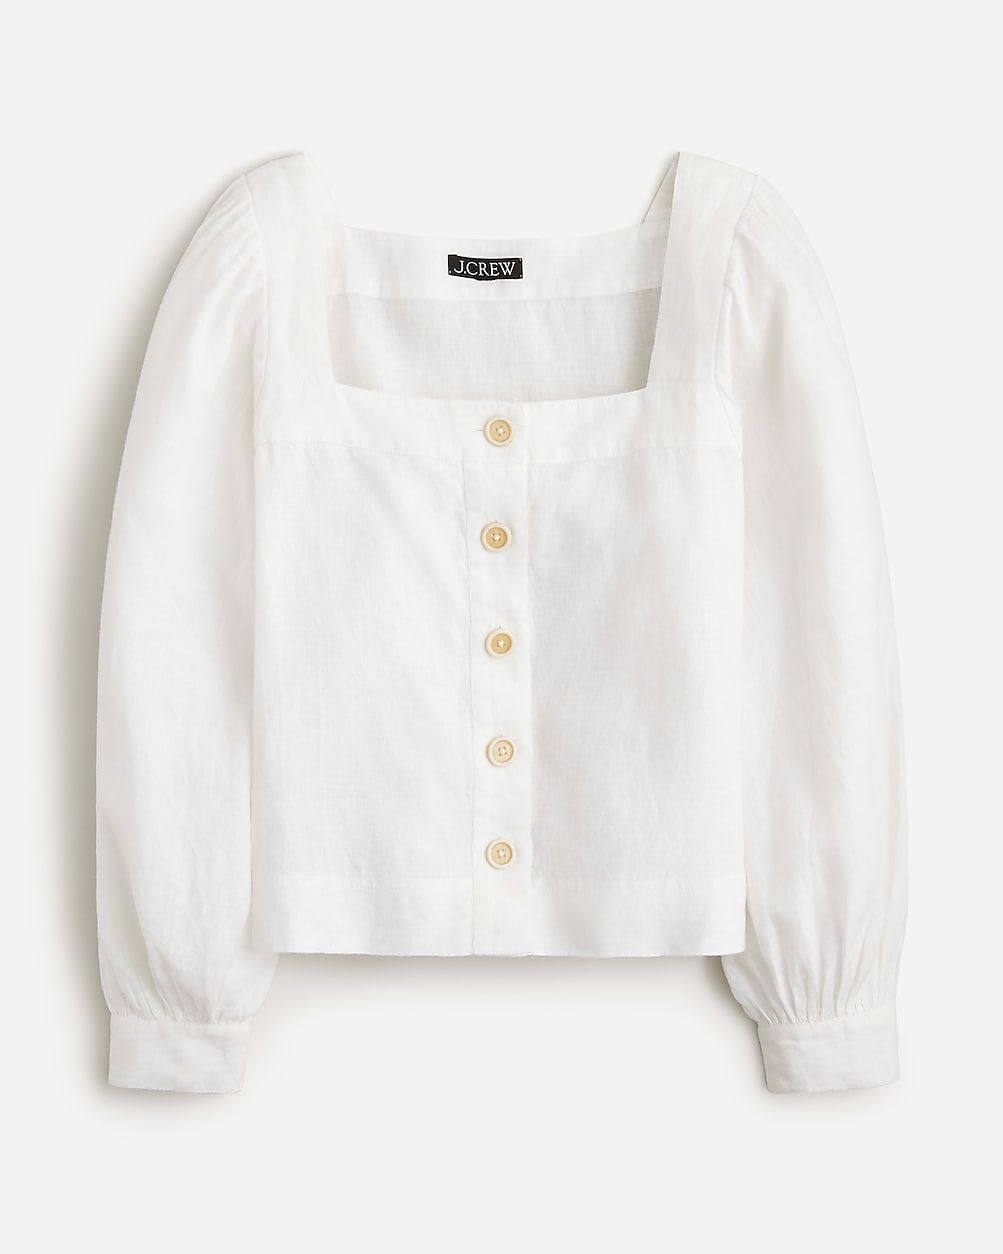 top rated4.2(45 REVIEWS)Squareneck button-up top in linen$62.50-$82.99$98.00Limited time. Price a... | J.Crew US